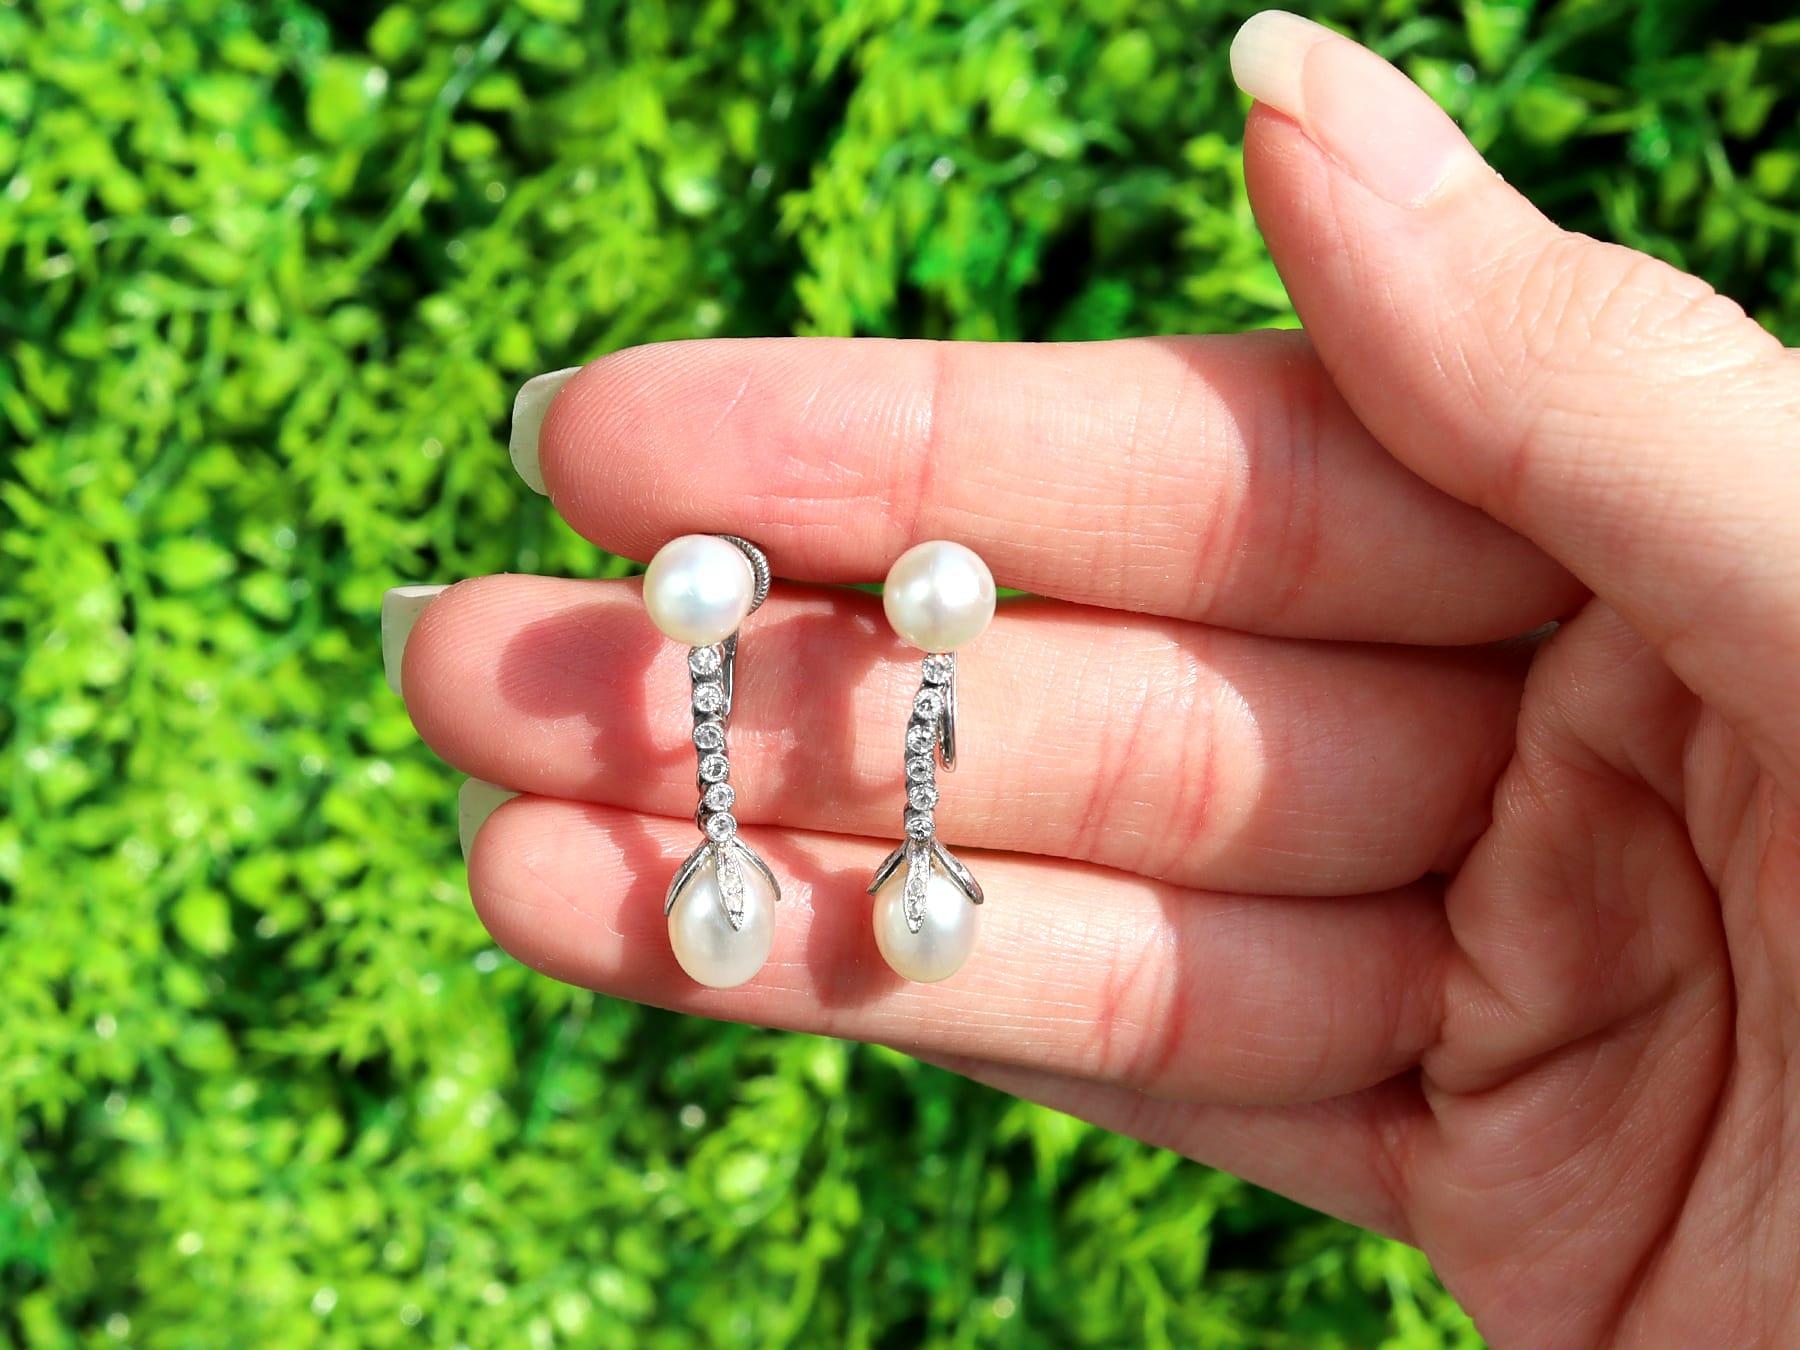 A stunning pair of antique natural white pearl and 0.36 carat diamond, platinum drop earrings; part of our diverse antique jewelry and estate jewelry collections.

These stunning, fine and impressive antique pearl and diamond drop earrings have been